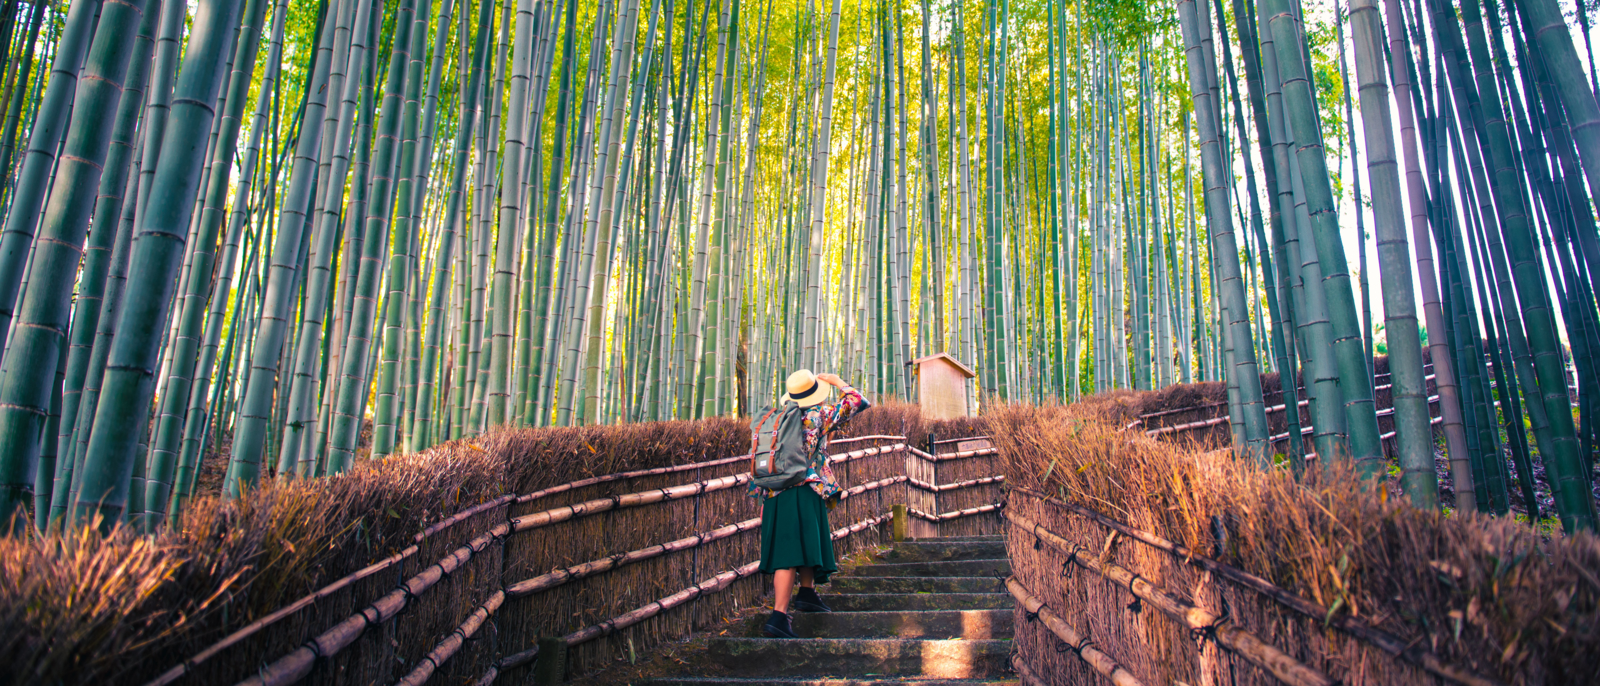 Tourist is walking through bamboo forest in Kyoto, Japan